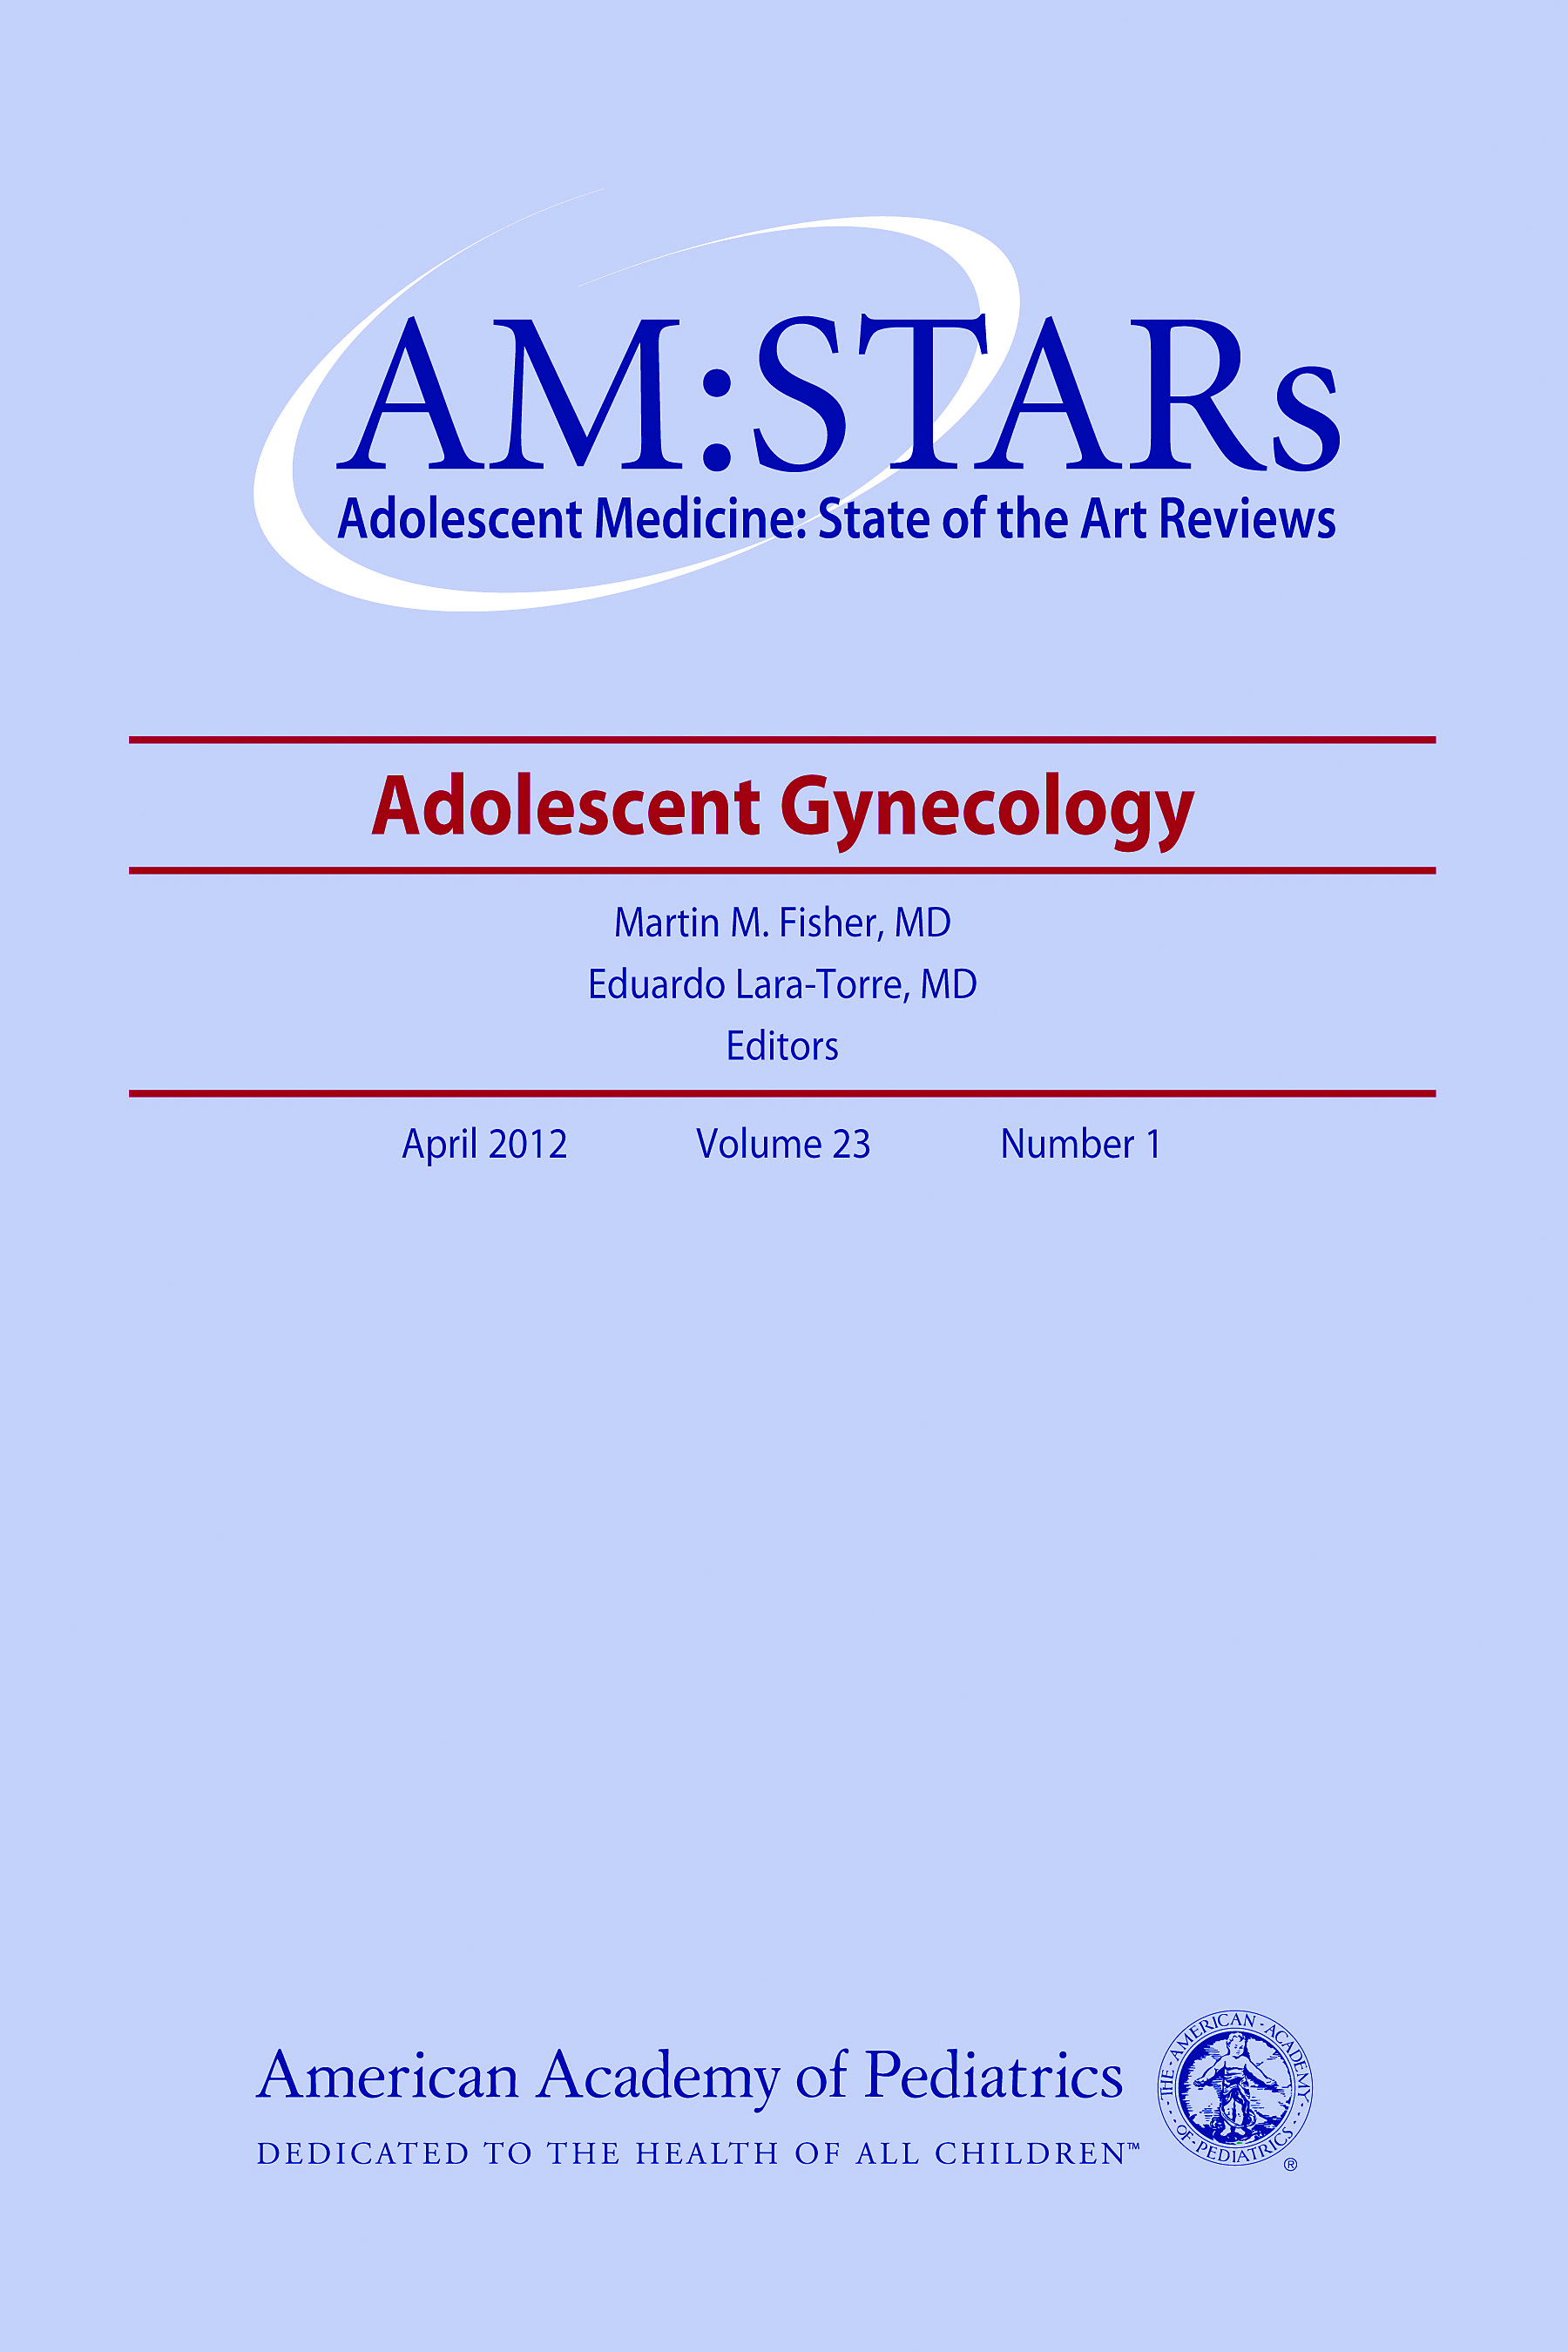 Image of the book cover for 'ADOLESCENT GYNECOLOGY'